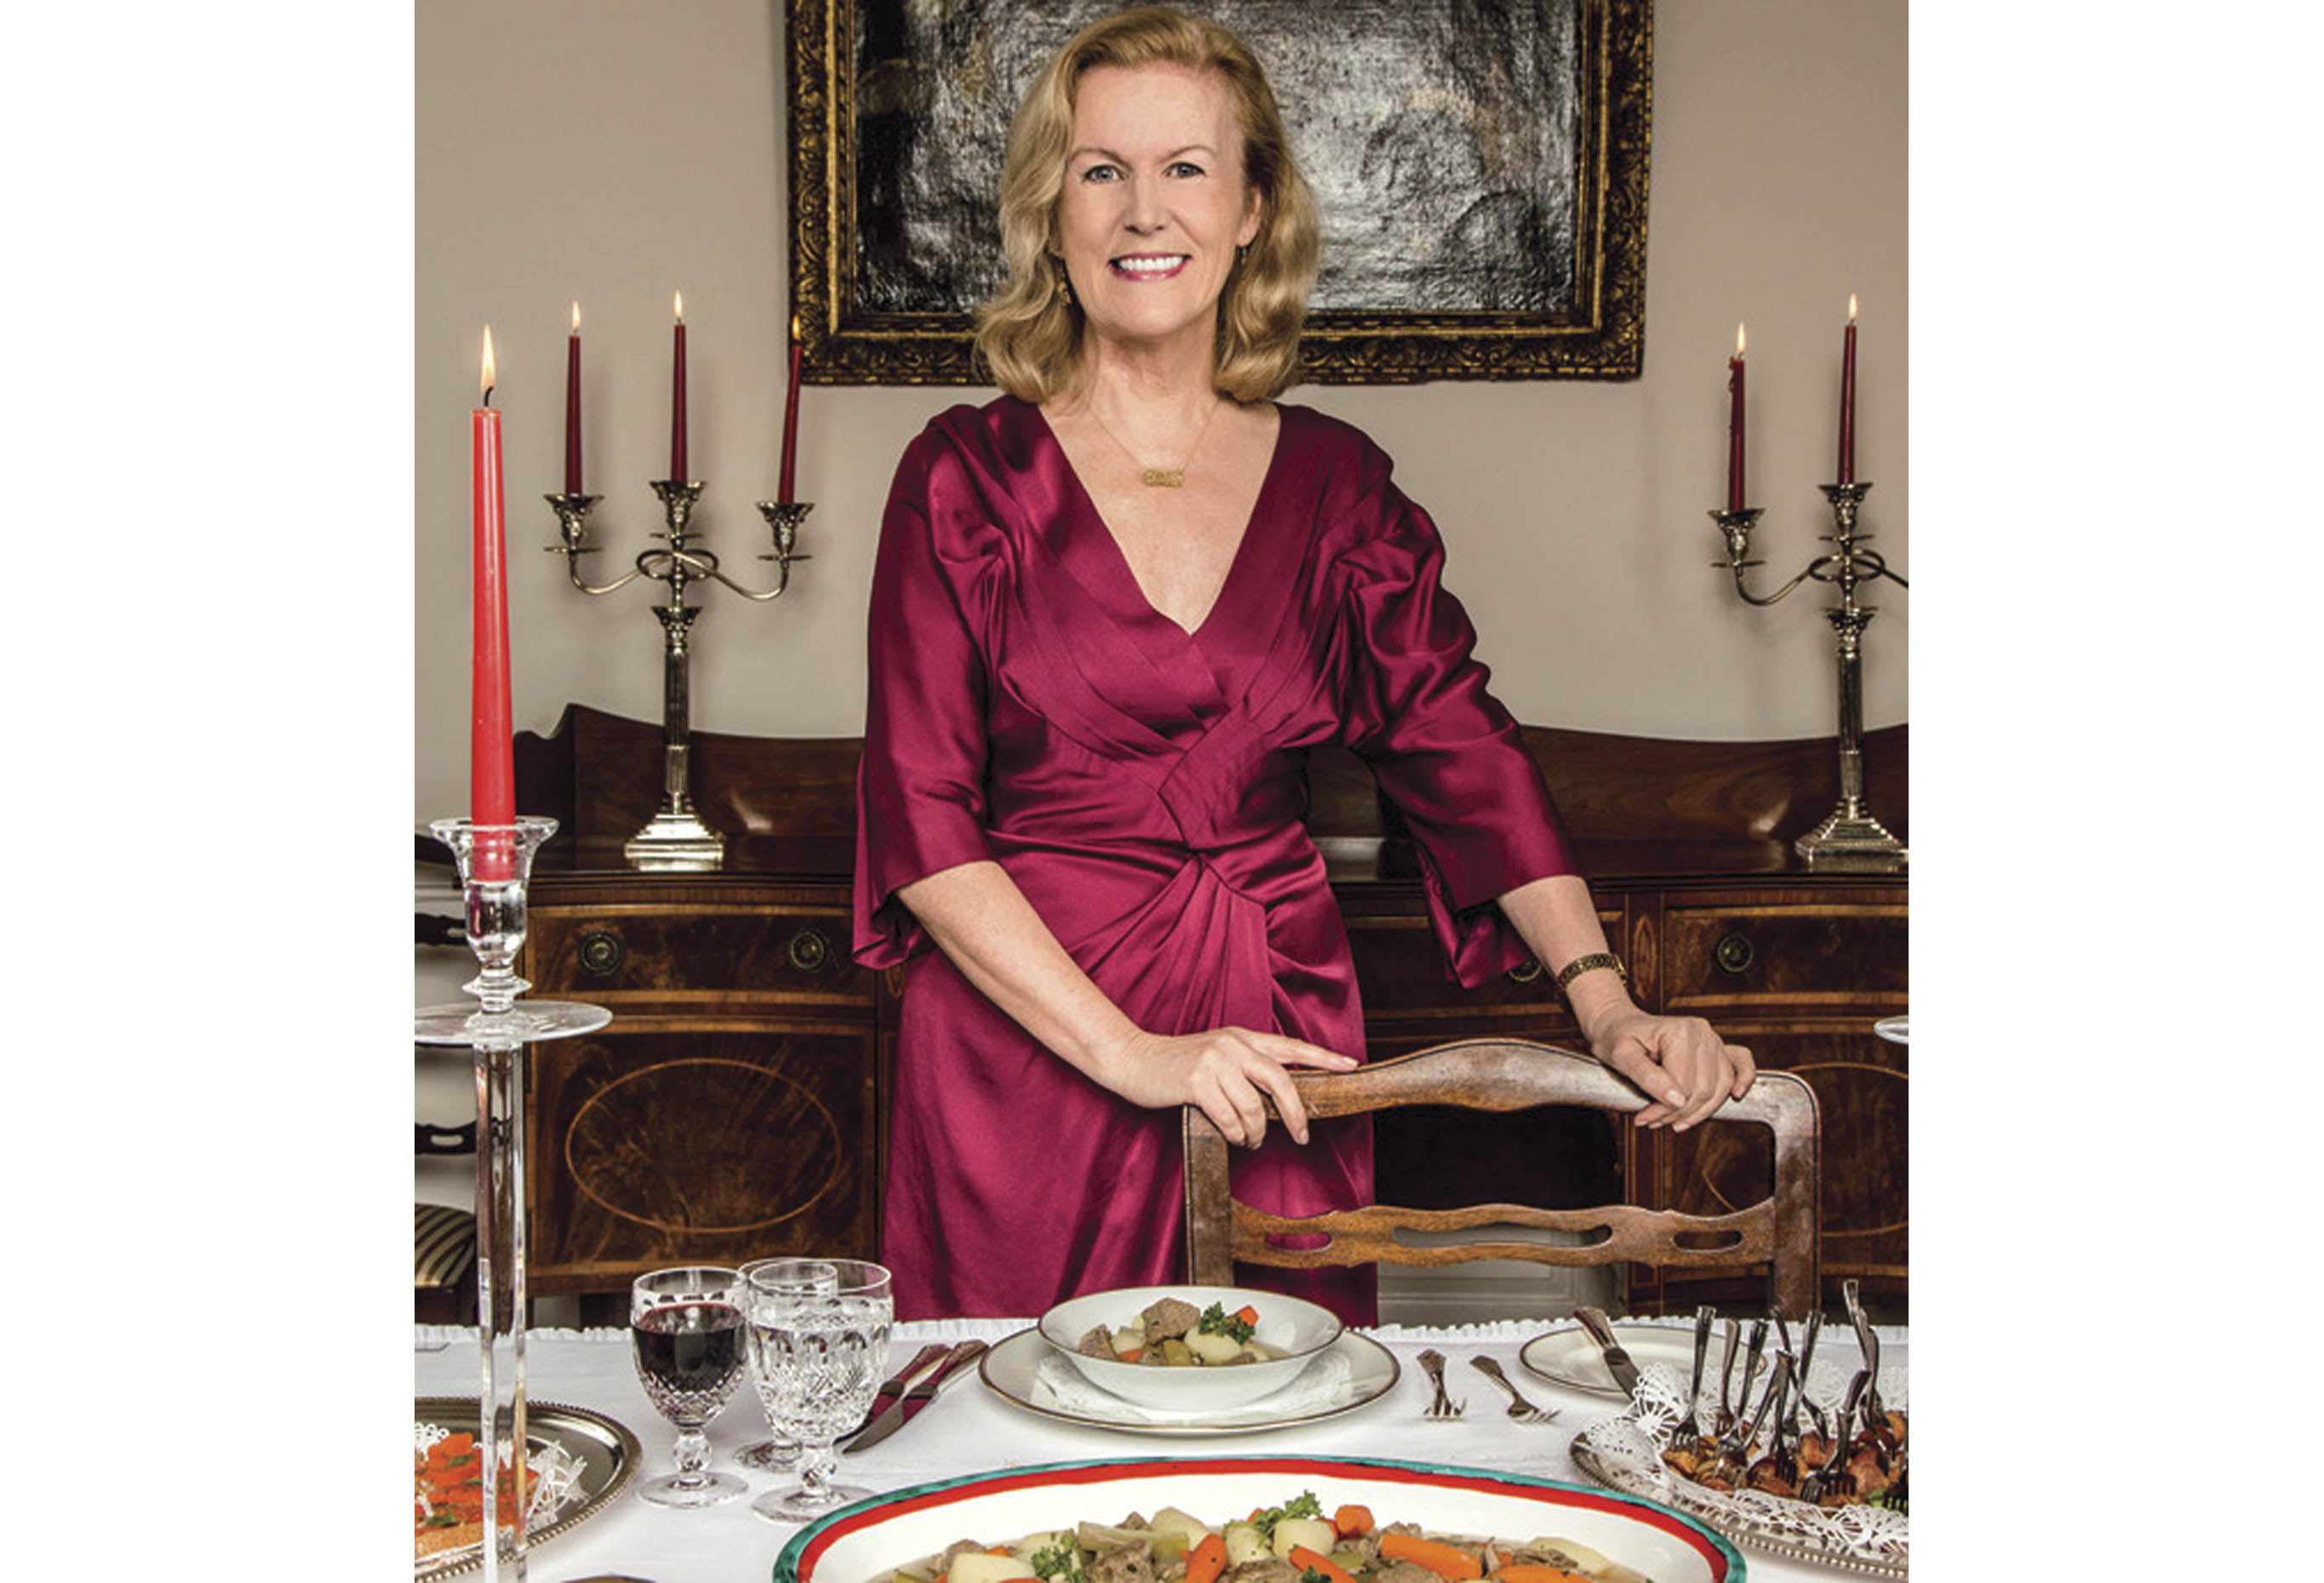 Ambassador  Anderson loves to highlight Ireland’s dairy and meat products when she hosts gatherings at her  residence, as this photo from Capitol File  illustrates.